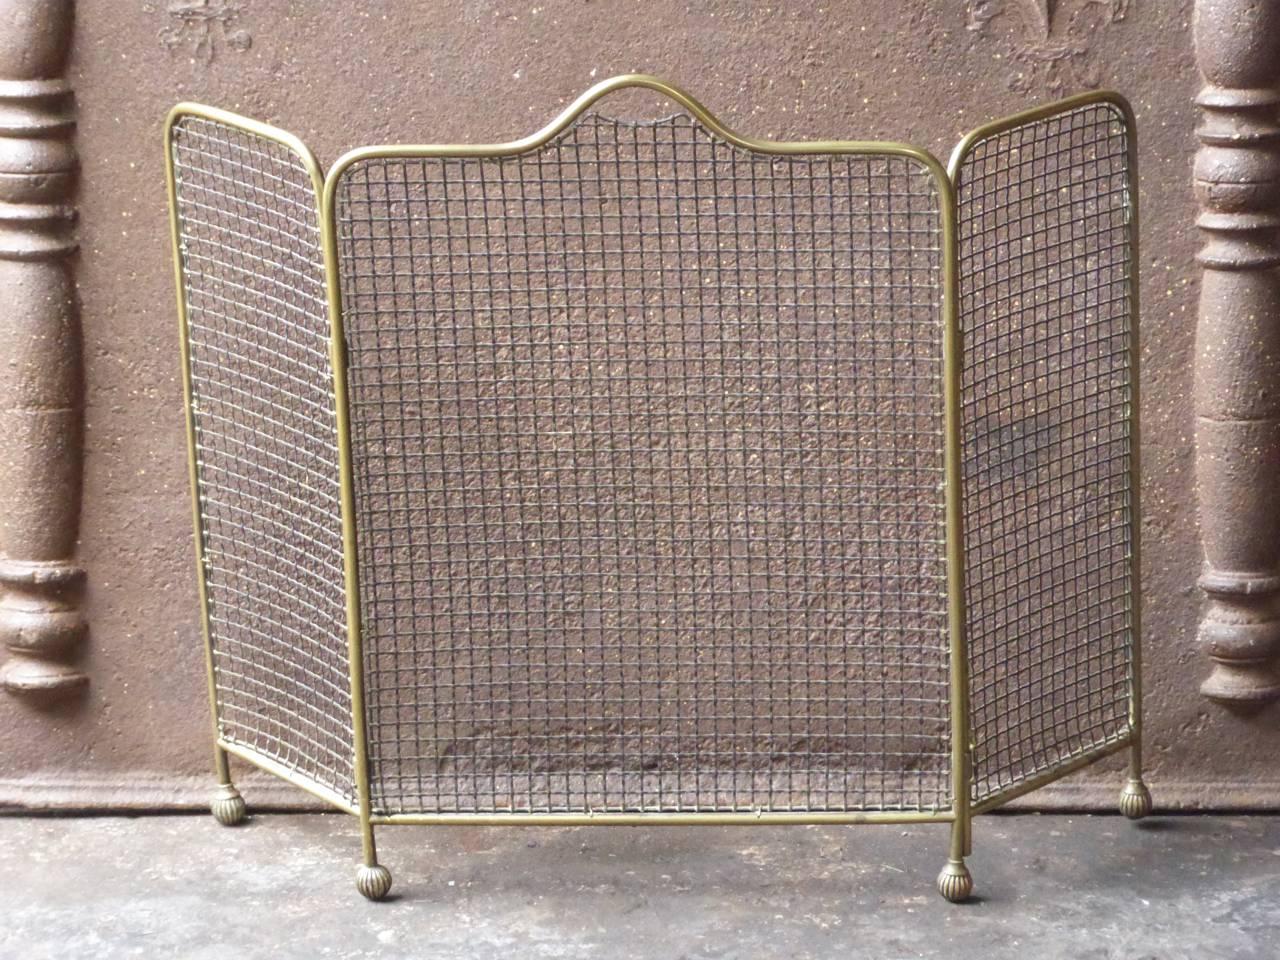 19th century English Victorian fireplace screen made of brass.

We have a unique and specialized collection of antique and used fireplace accessories consisting of more than 1000 listings at 1stdibs. Amongst others, we always have 300+ firebacks,